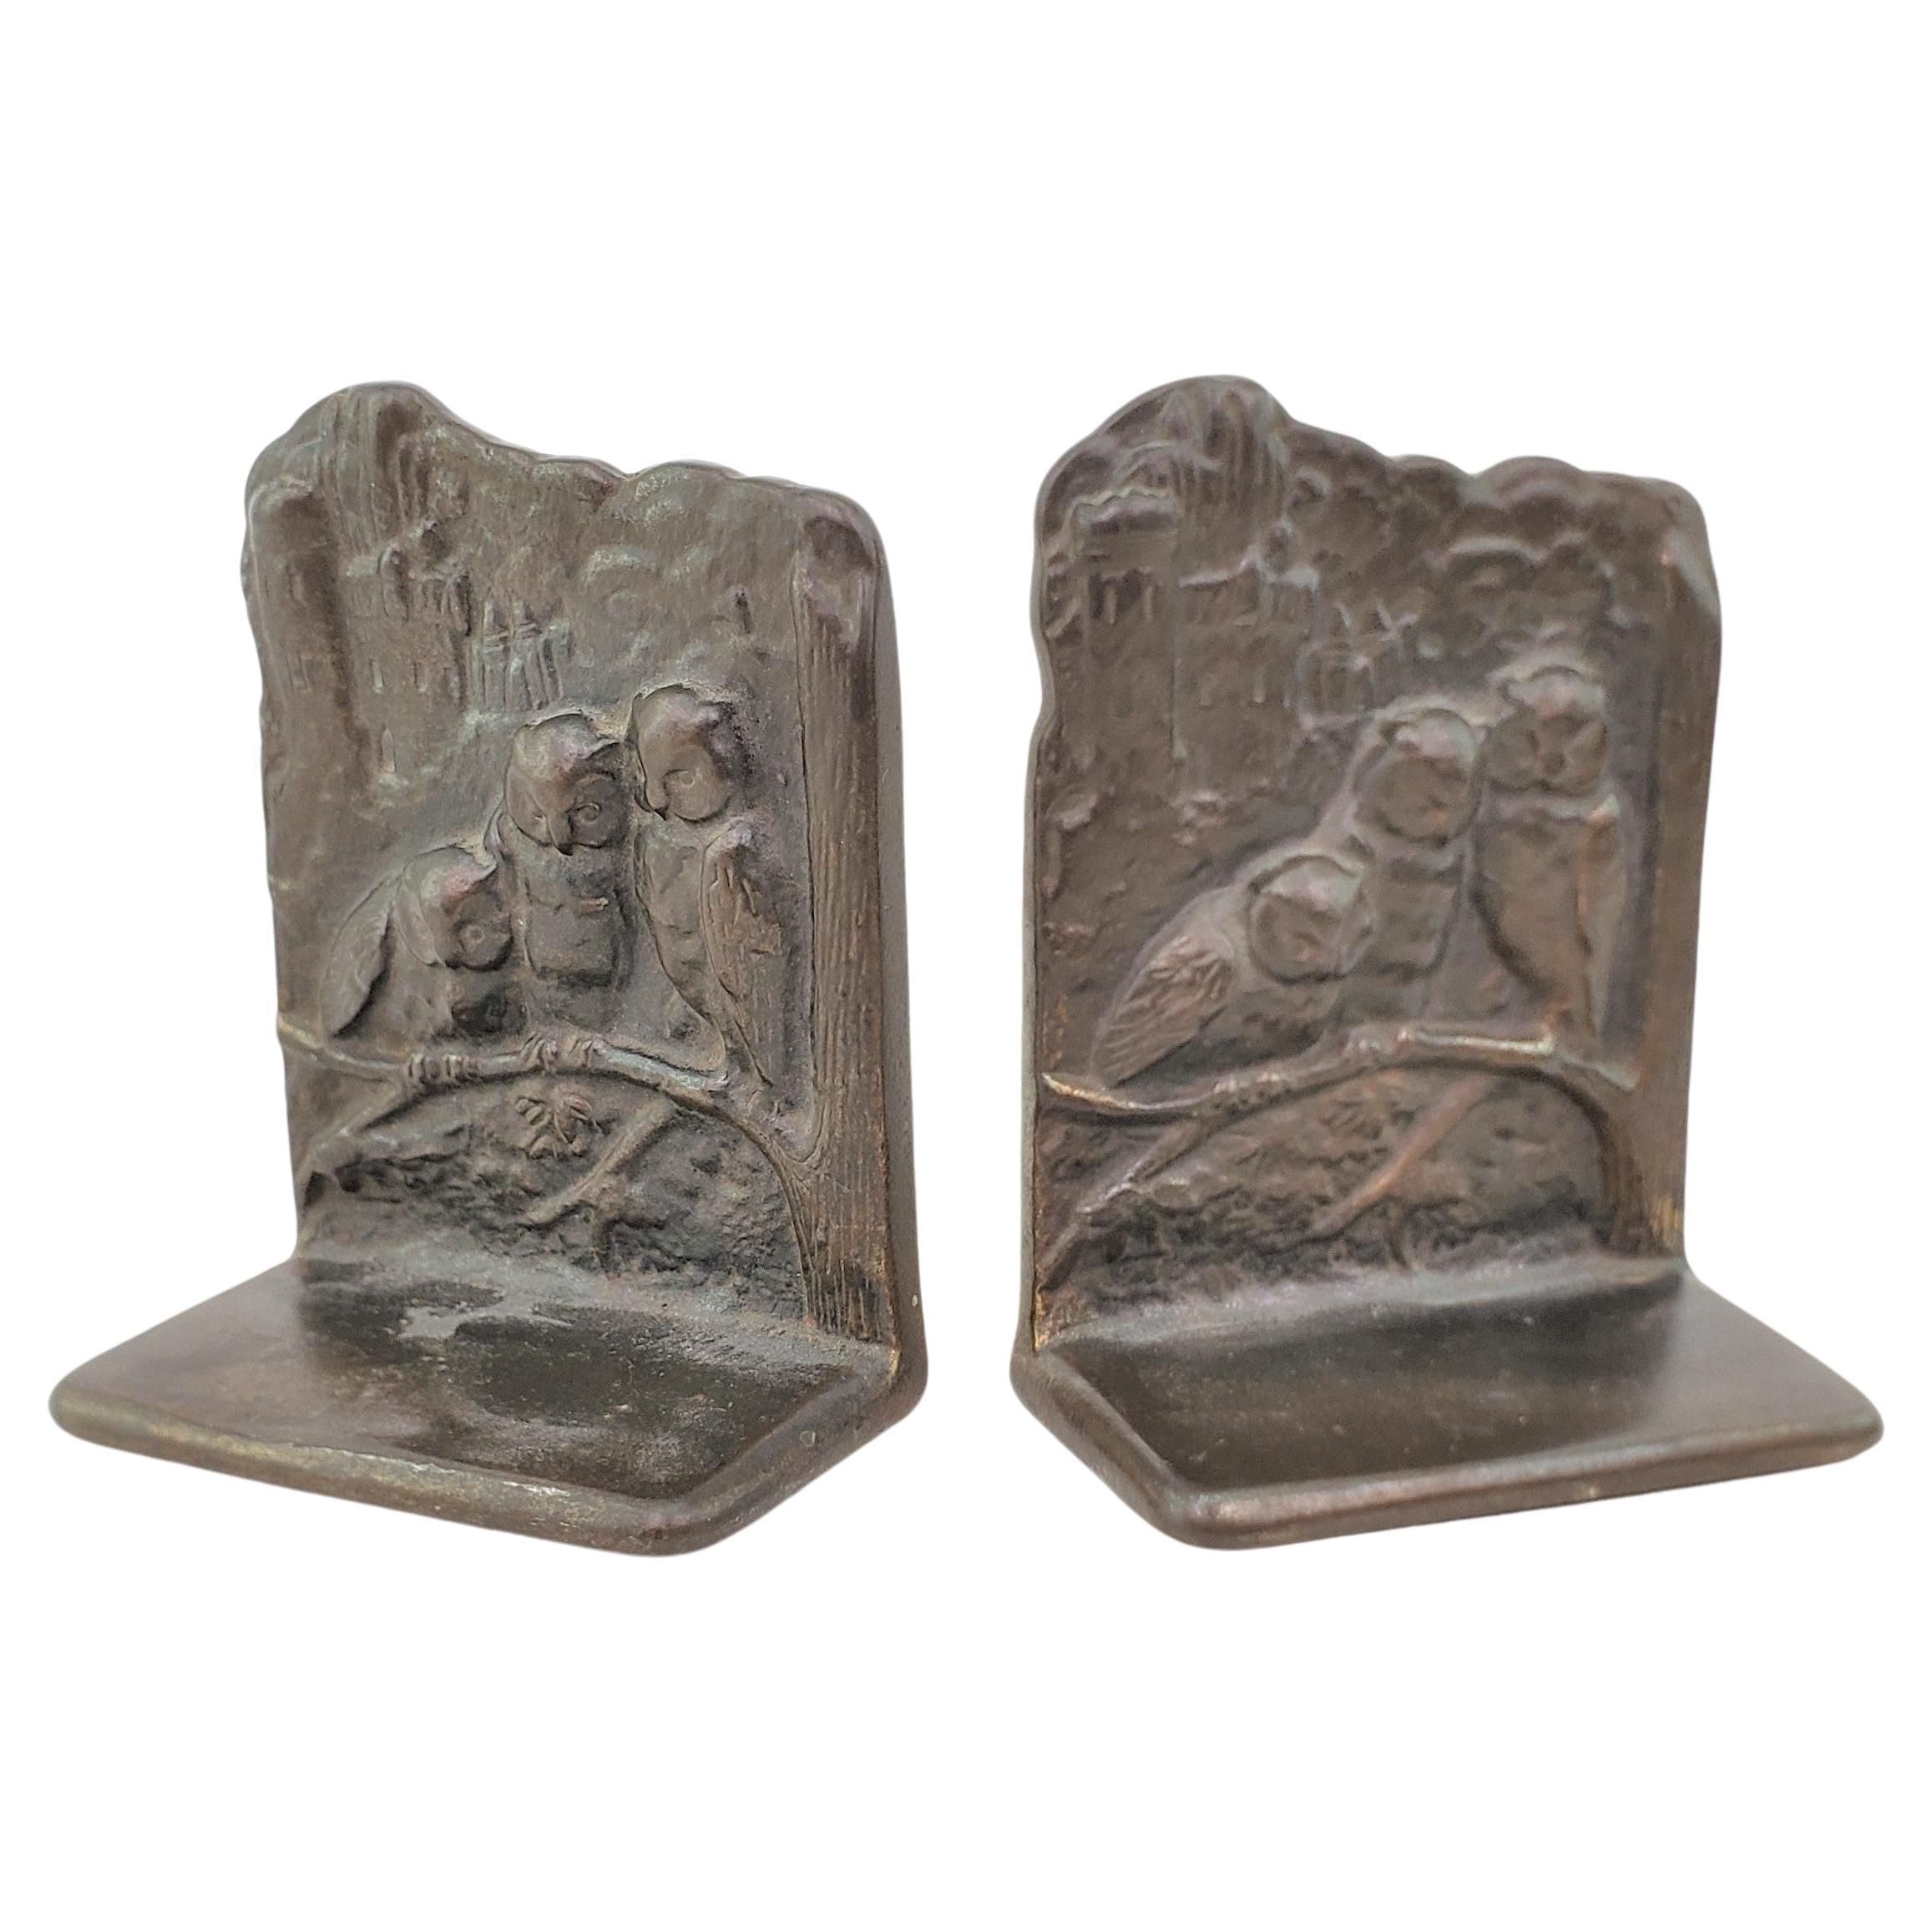 Antique Art Deco Cast & Patinated Bookends Depicting Three Perched Owls For Sale